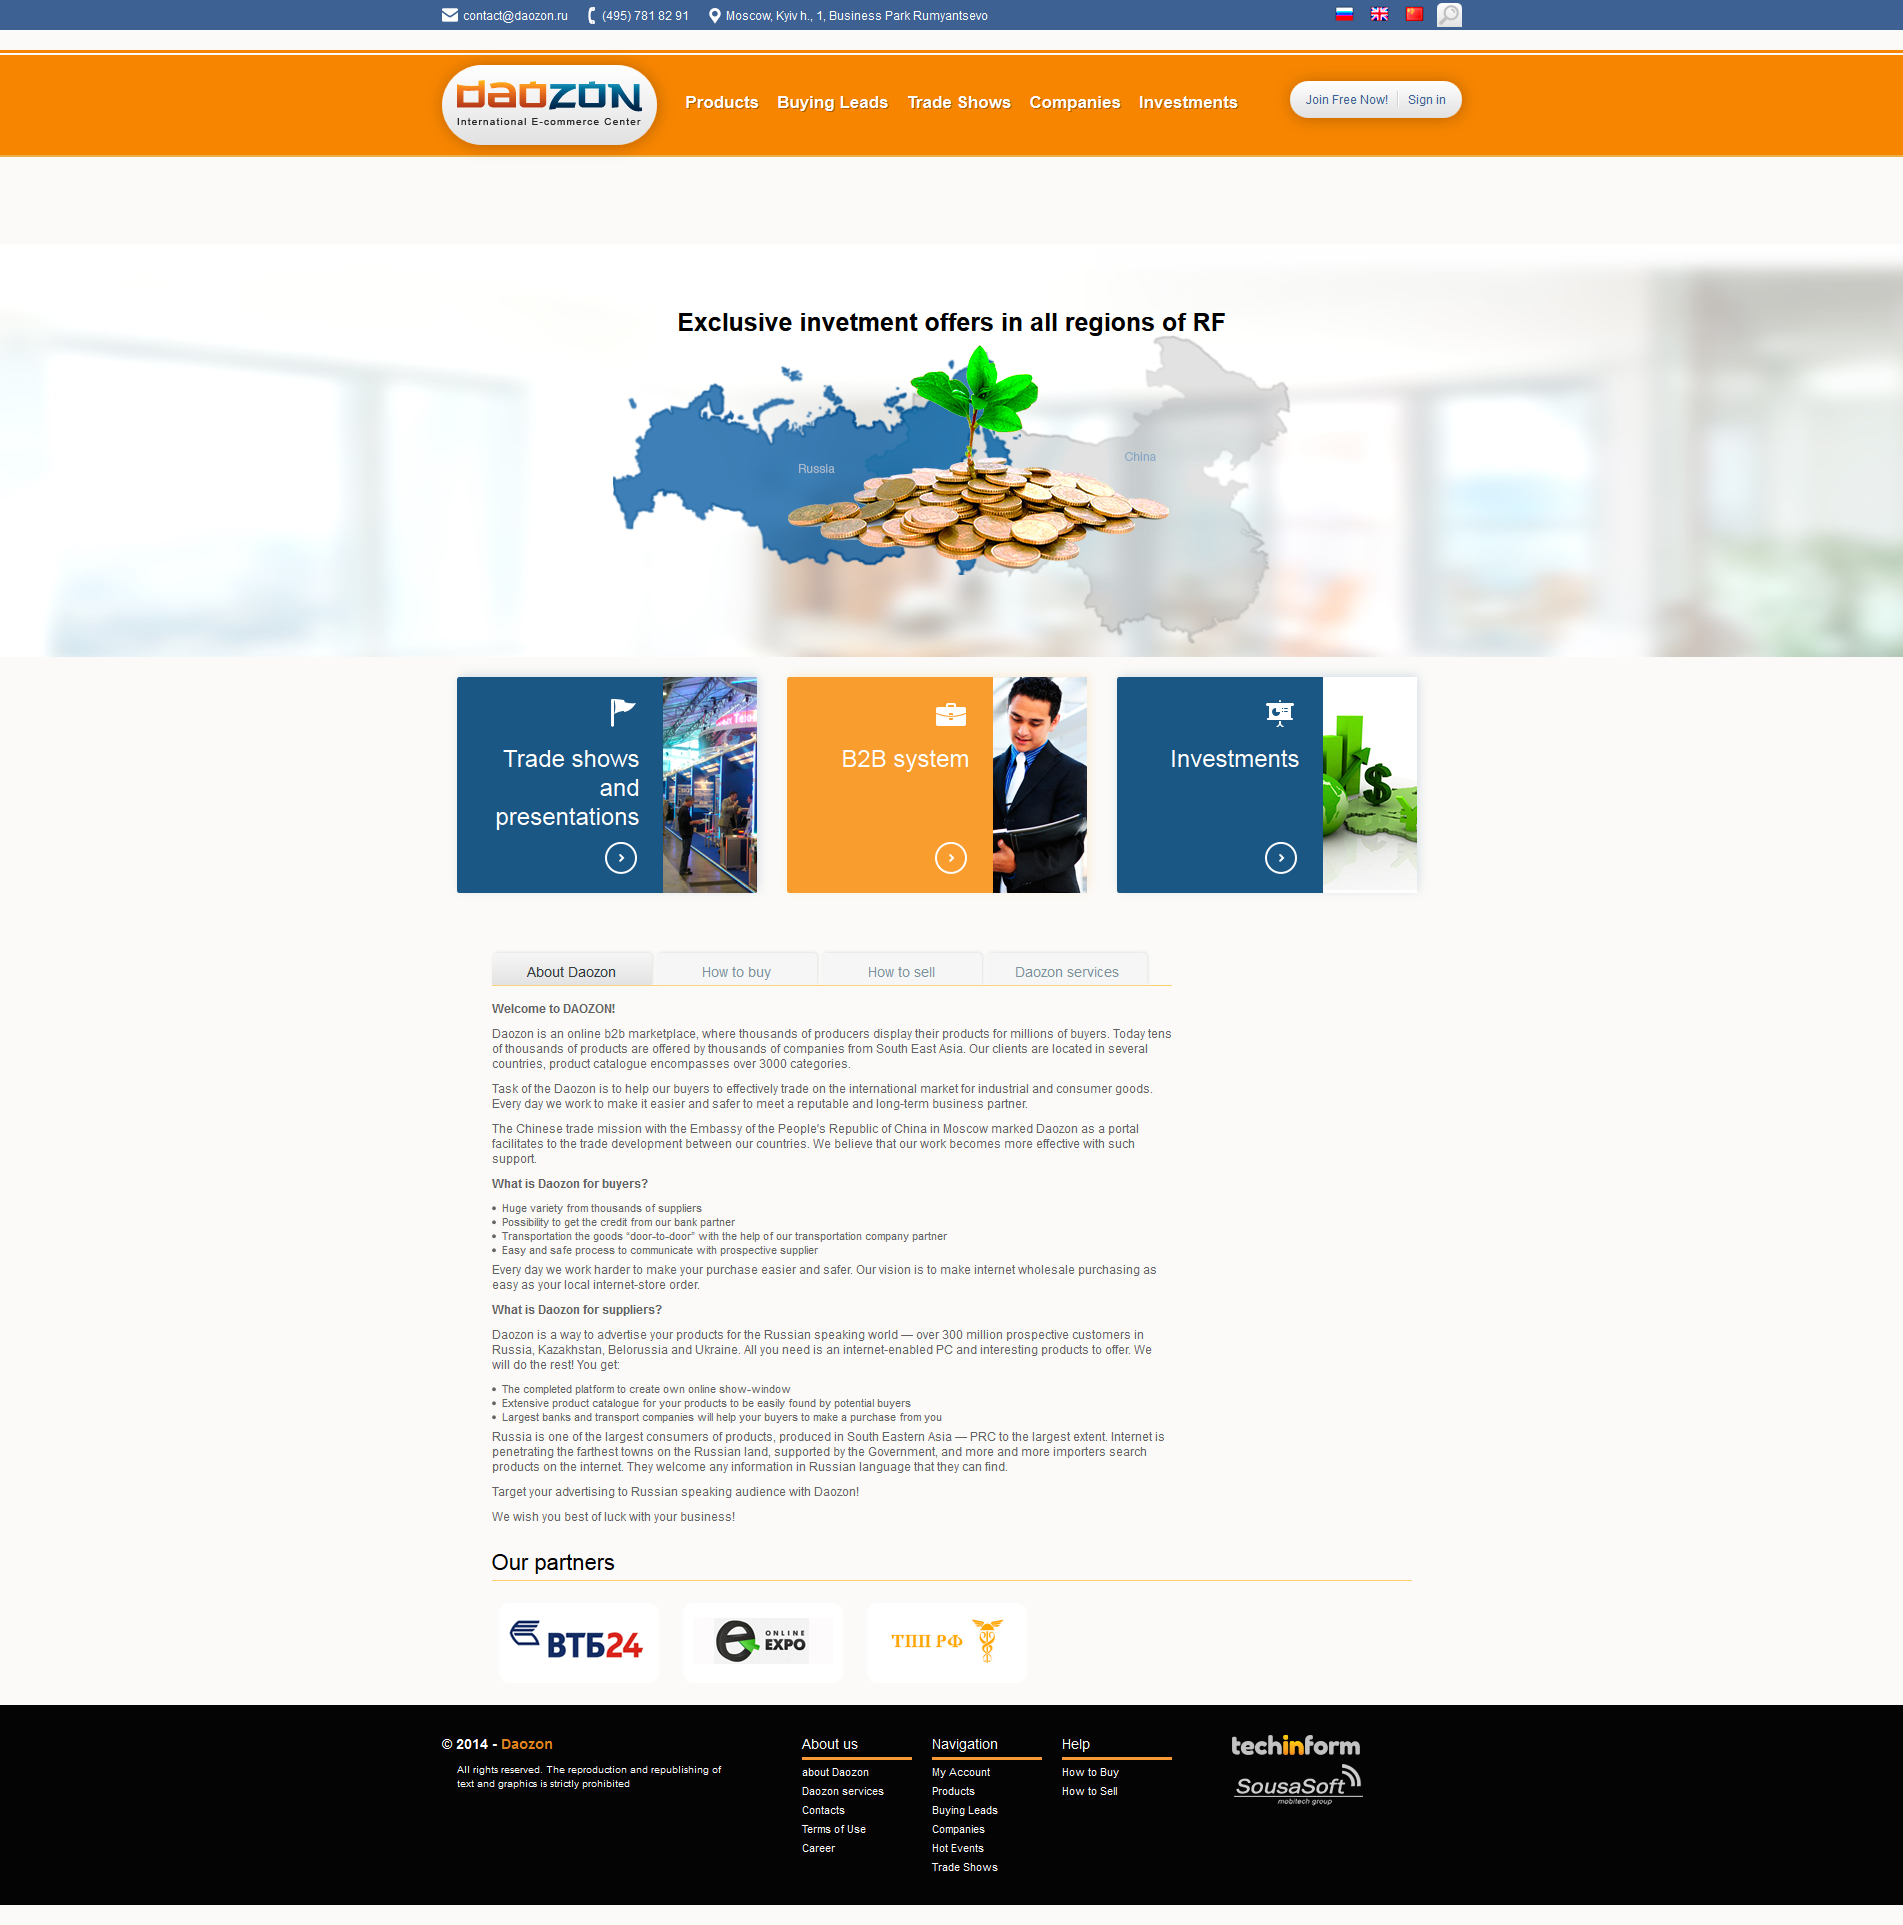 B2b business portal  for companies, buyers and investors